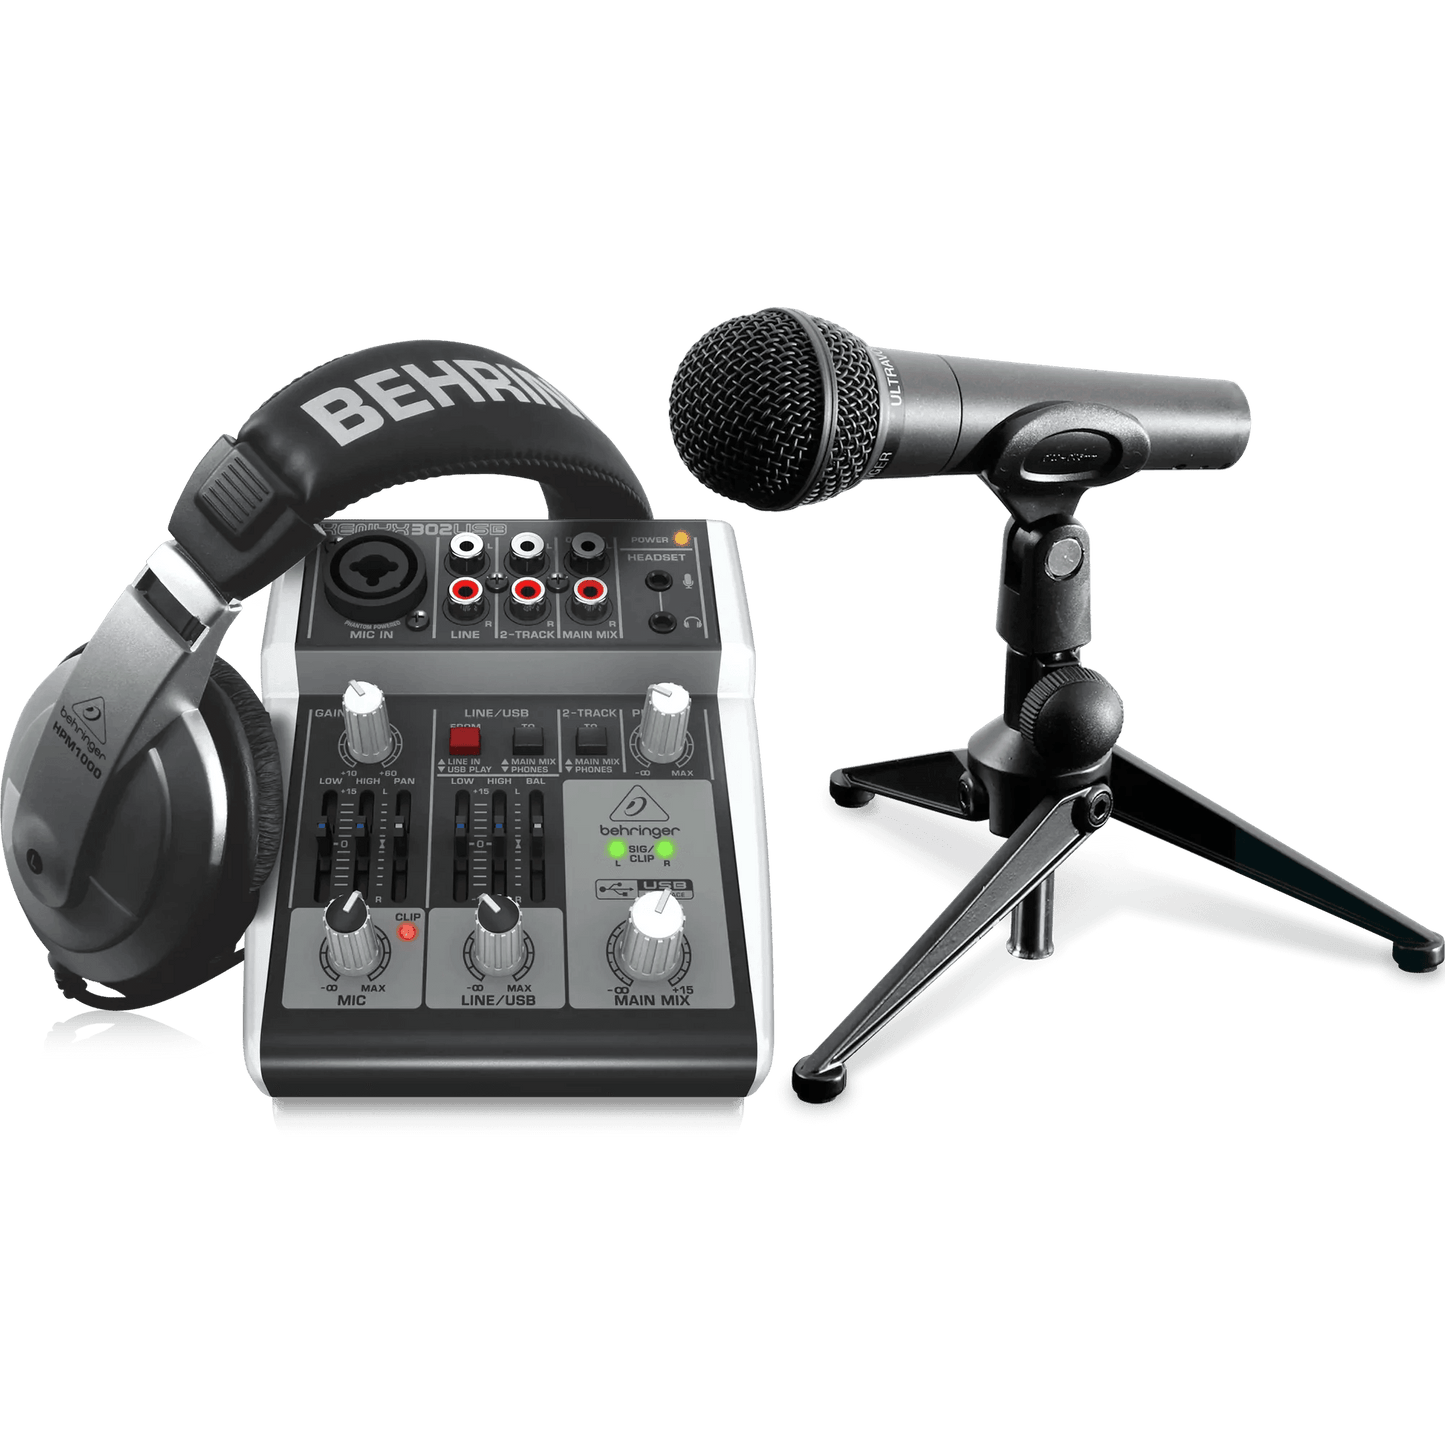 Behringer PODCAST STUDIO 2 USB Podcasting Bundle with USB Mixer, Microphone, Headphones and More